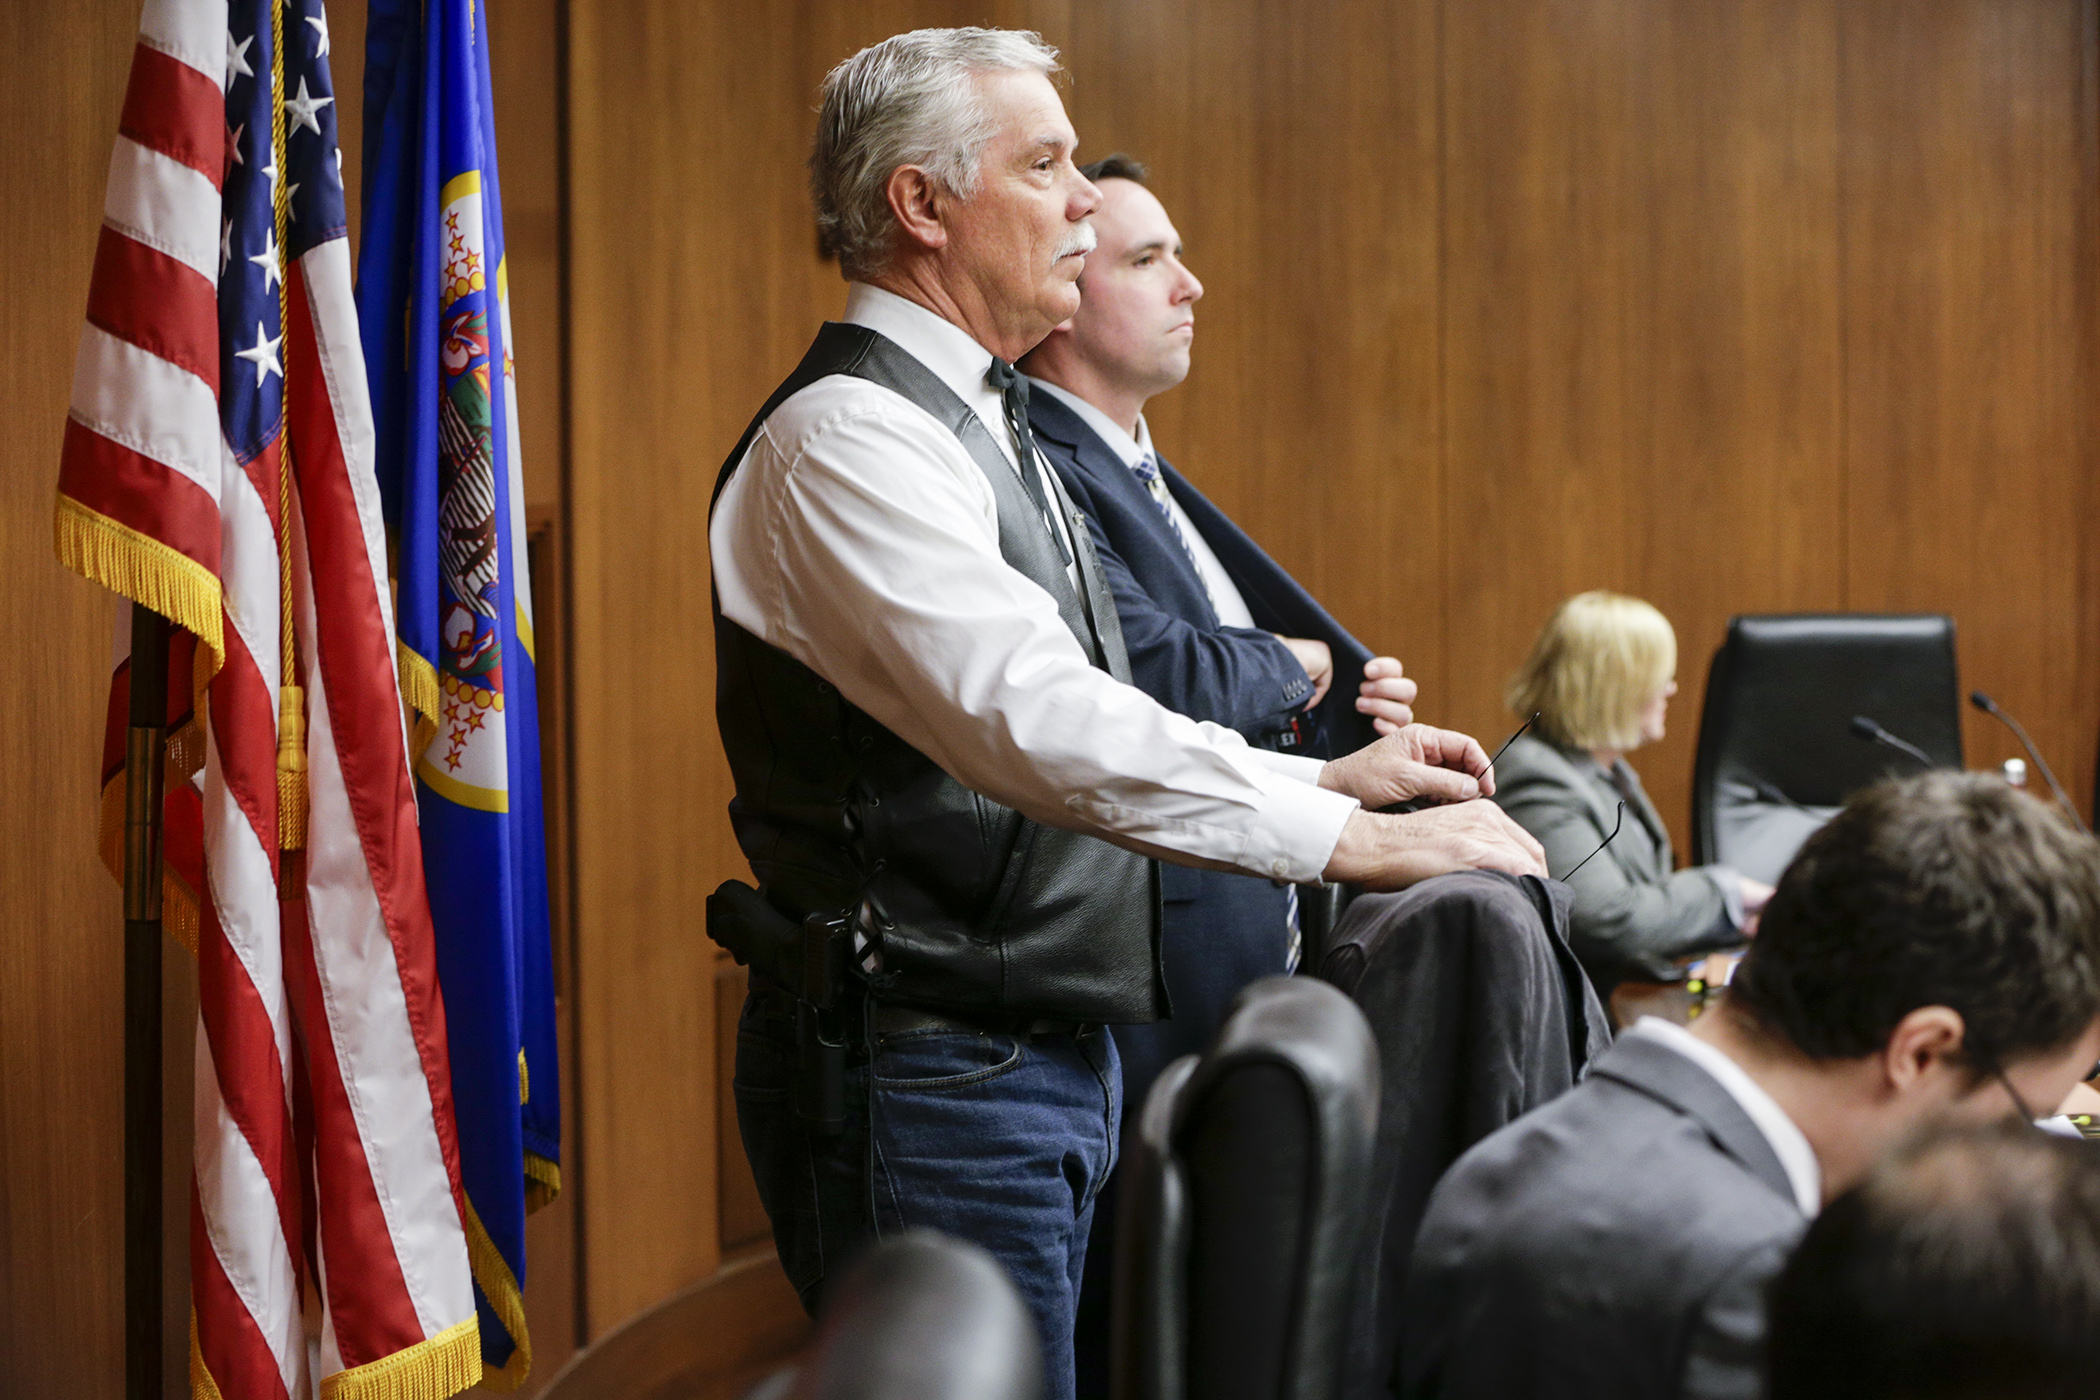 Rep. Tony Cornish, chair of the House Public Safety and Security Policy and Finance Committee, waits — with a sidearm on his hip — to begin a March 8 hearing on two gun-related bills. Photo by Paul Battaglia